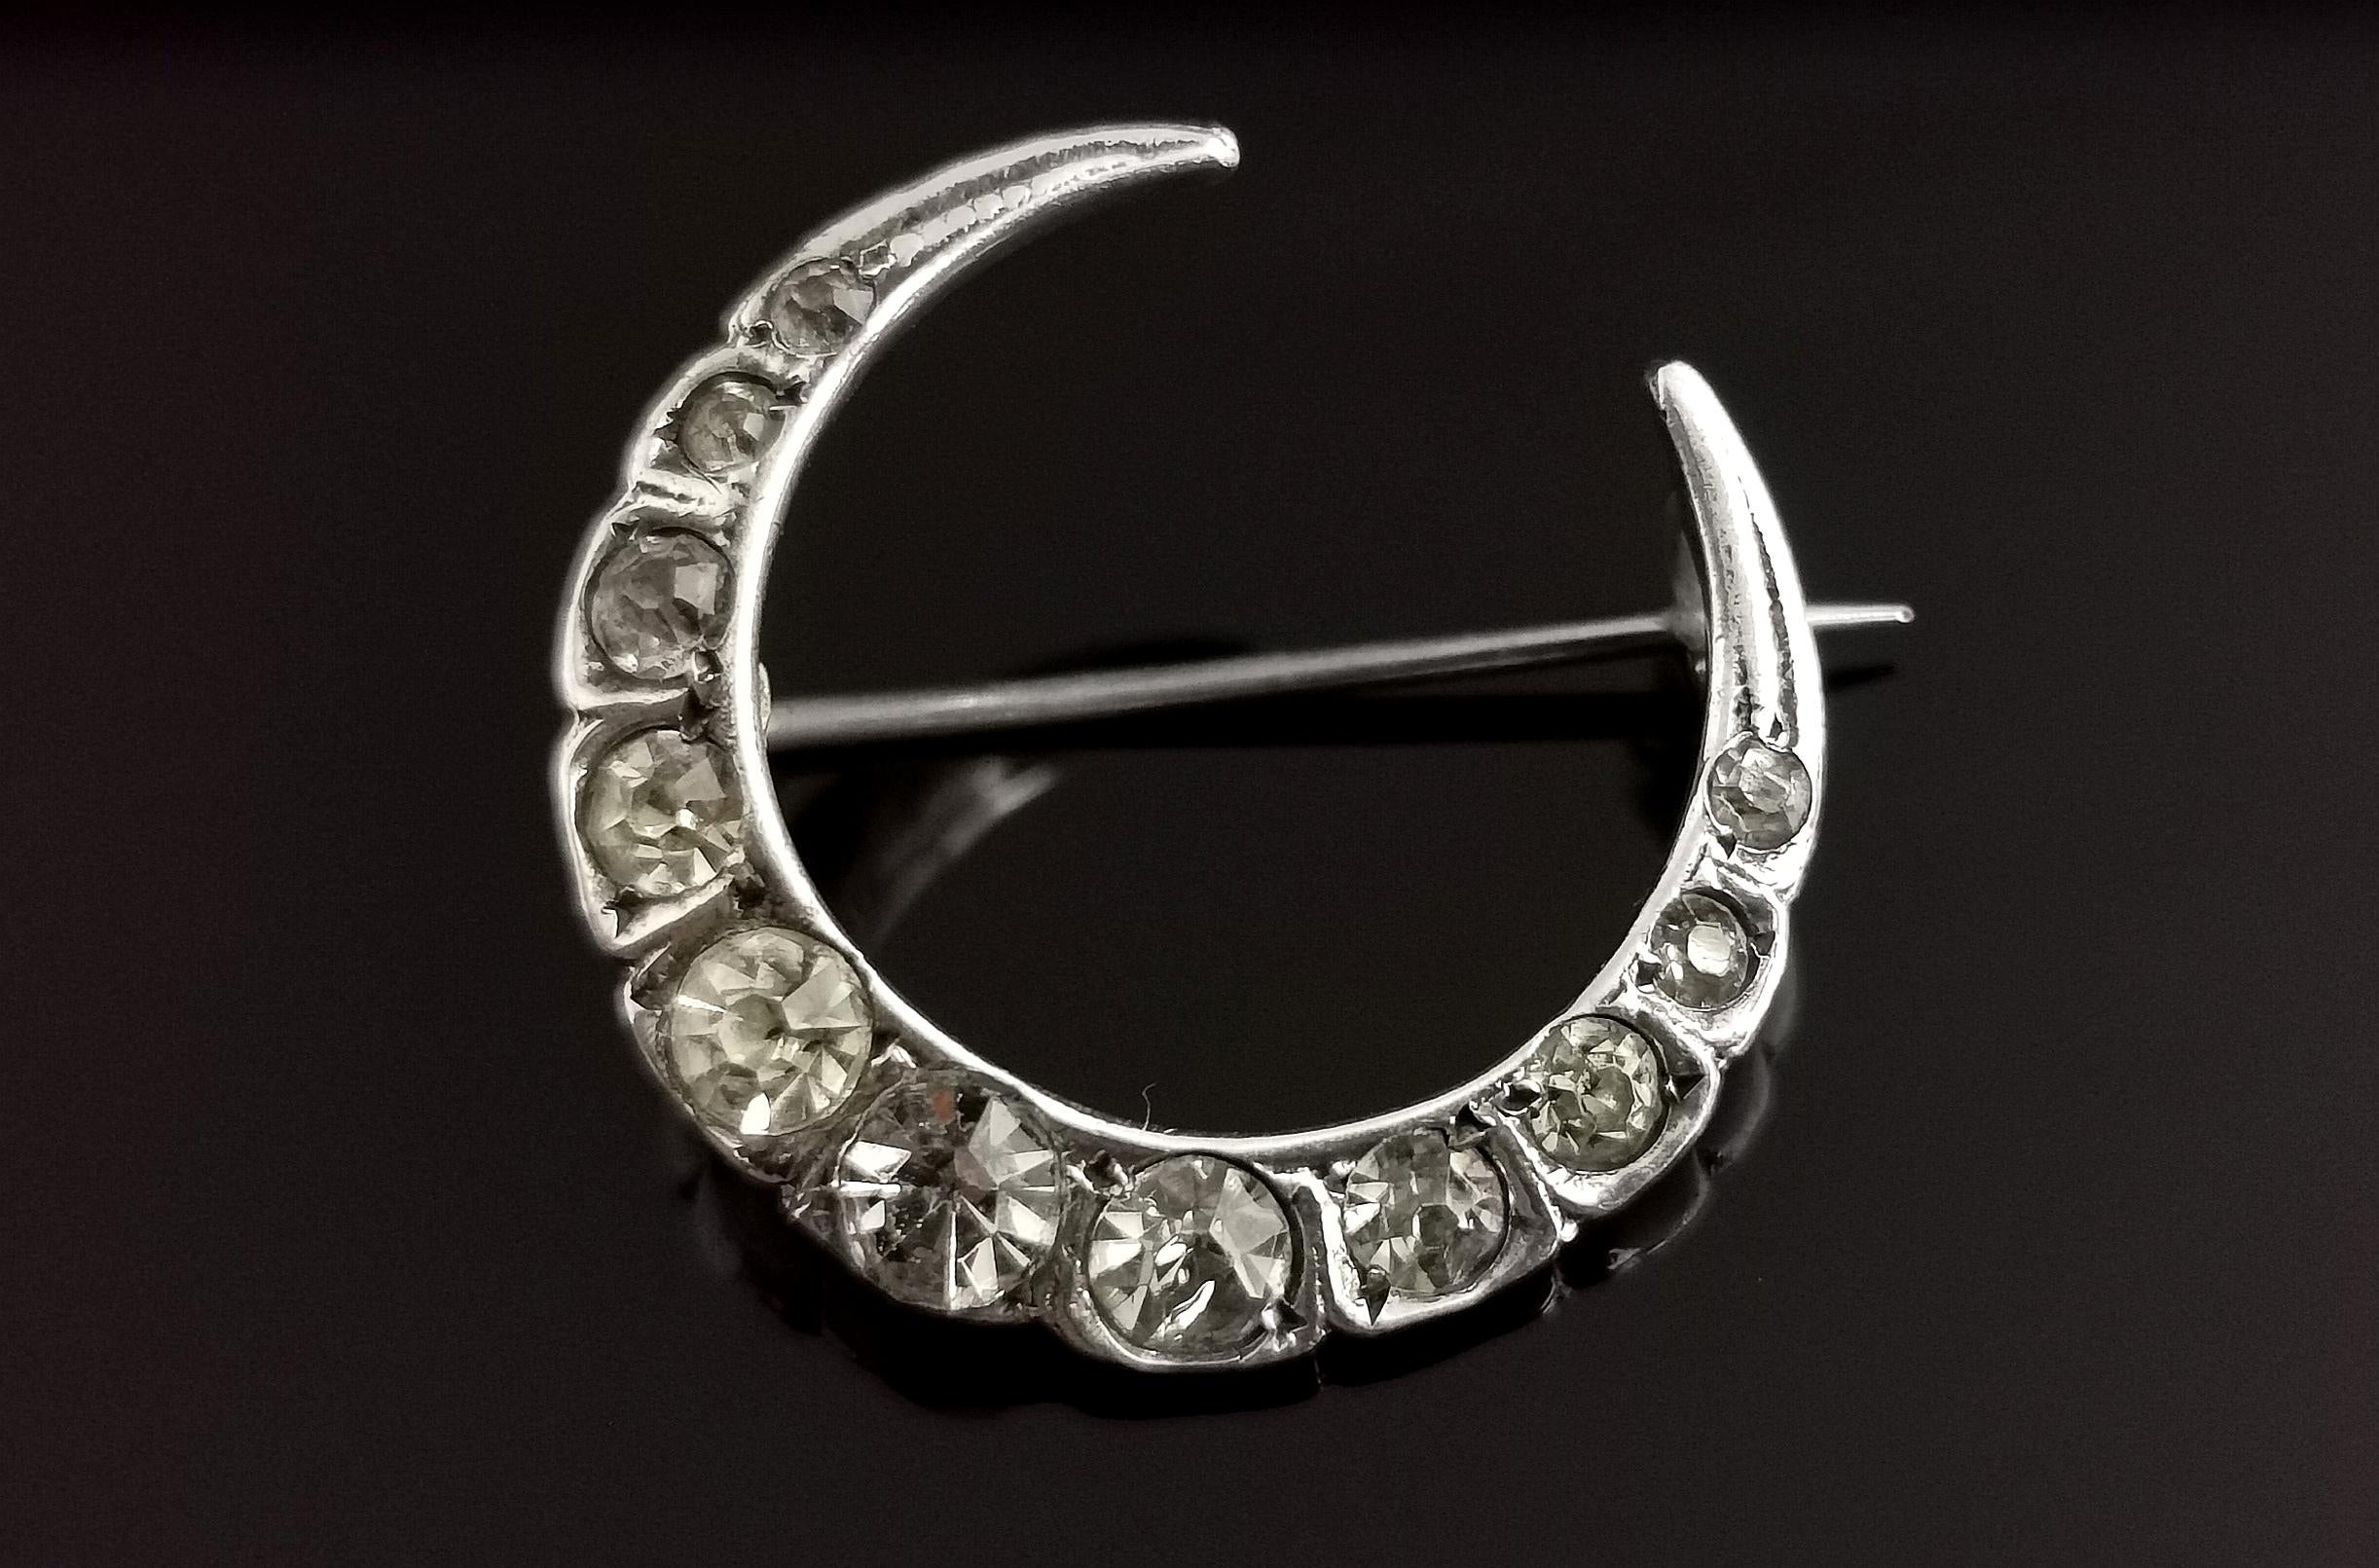 A very pretty late Victorian, silver and paste crescent brooch.

A beautiful curved moon set with pretty sparkling paste stones, resembling diamond with plenty of sparkle.

Paste jewellery despite being used as a low cost substitute for diamond on